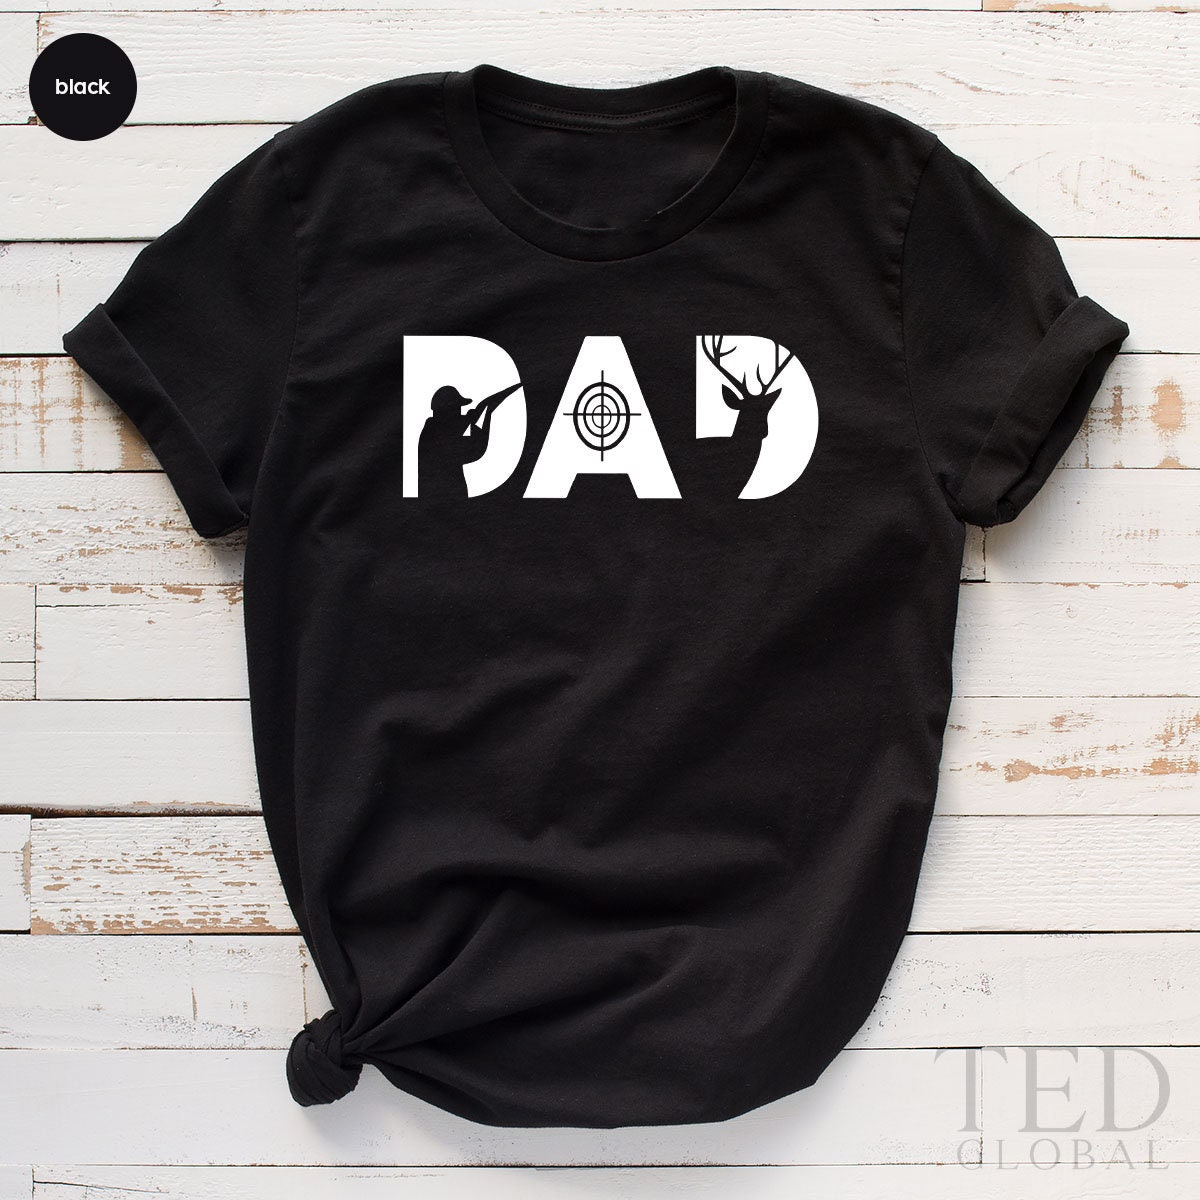 Hunting Dad T Shirt, Hunters Dad TShirt, Fathers Day Gift For Deer Hunters, Bow Hunting Shirt, Adventure Lover Tee, Cool Dad Shirt From Wife - Fastdeliverytees.com